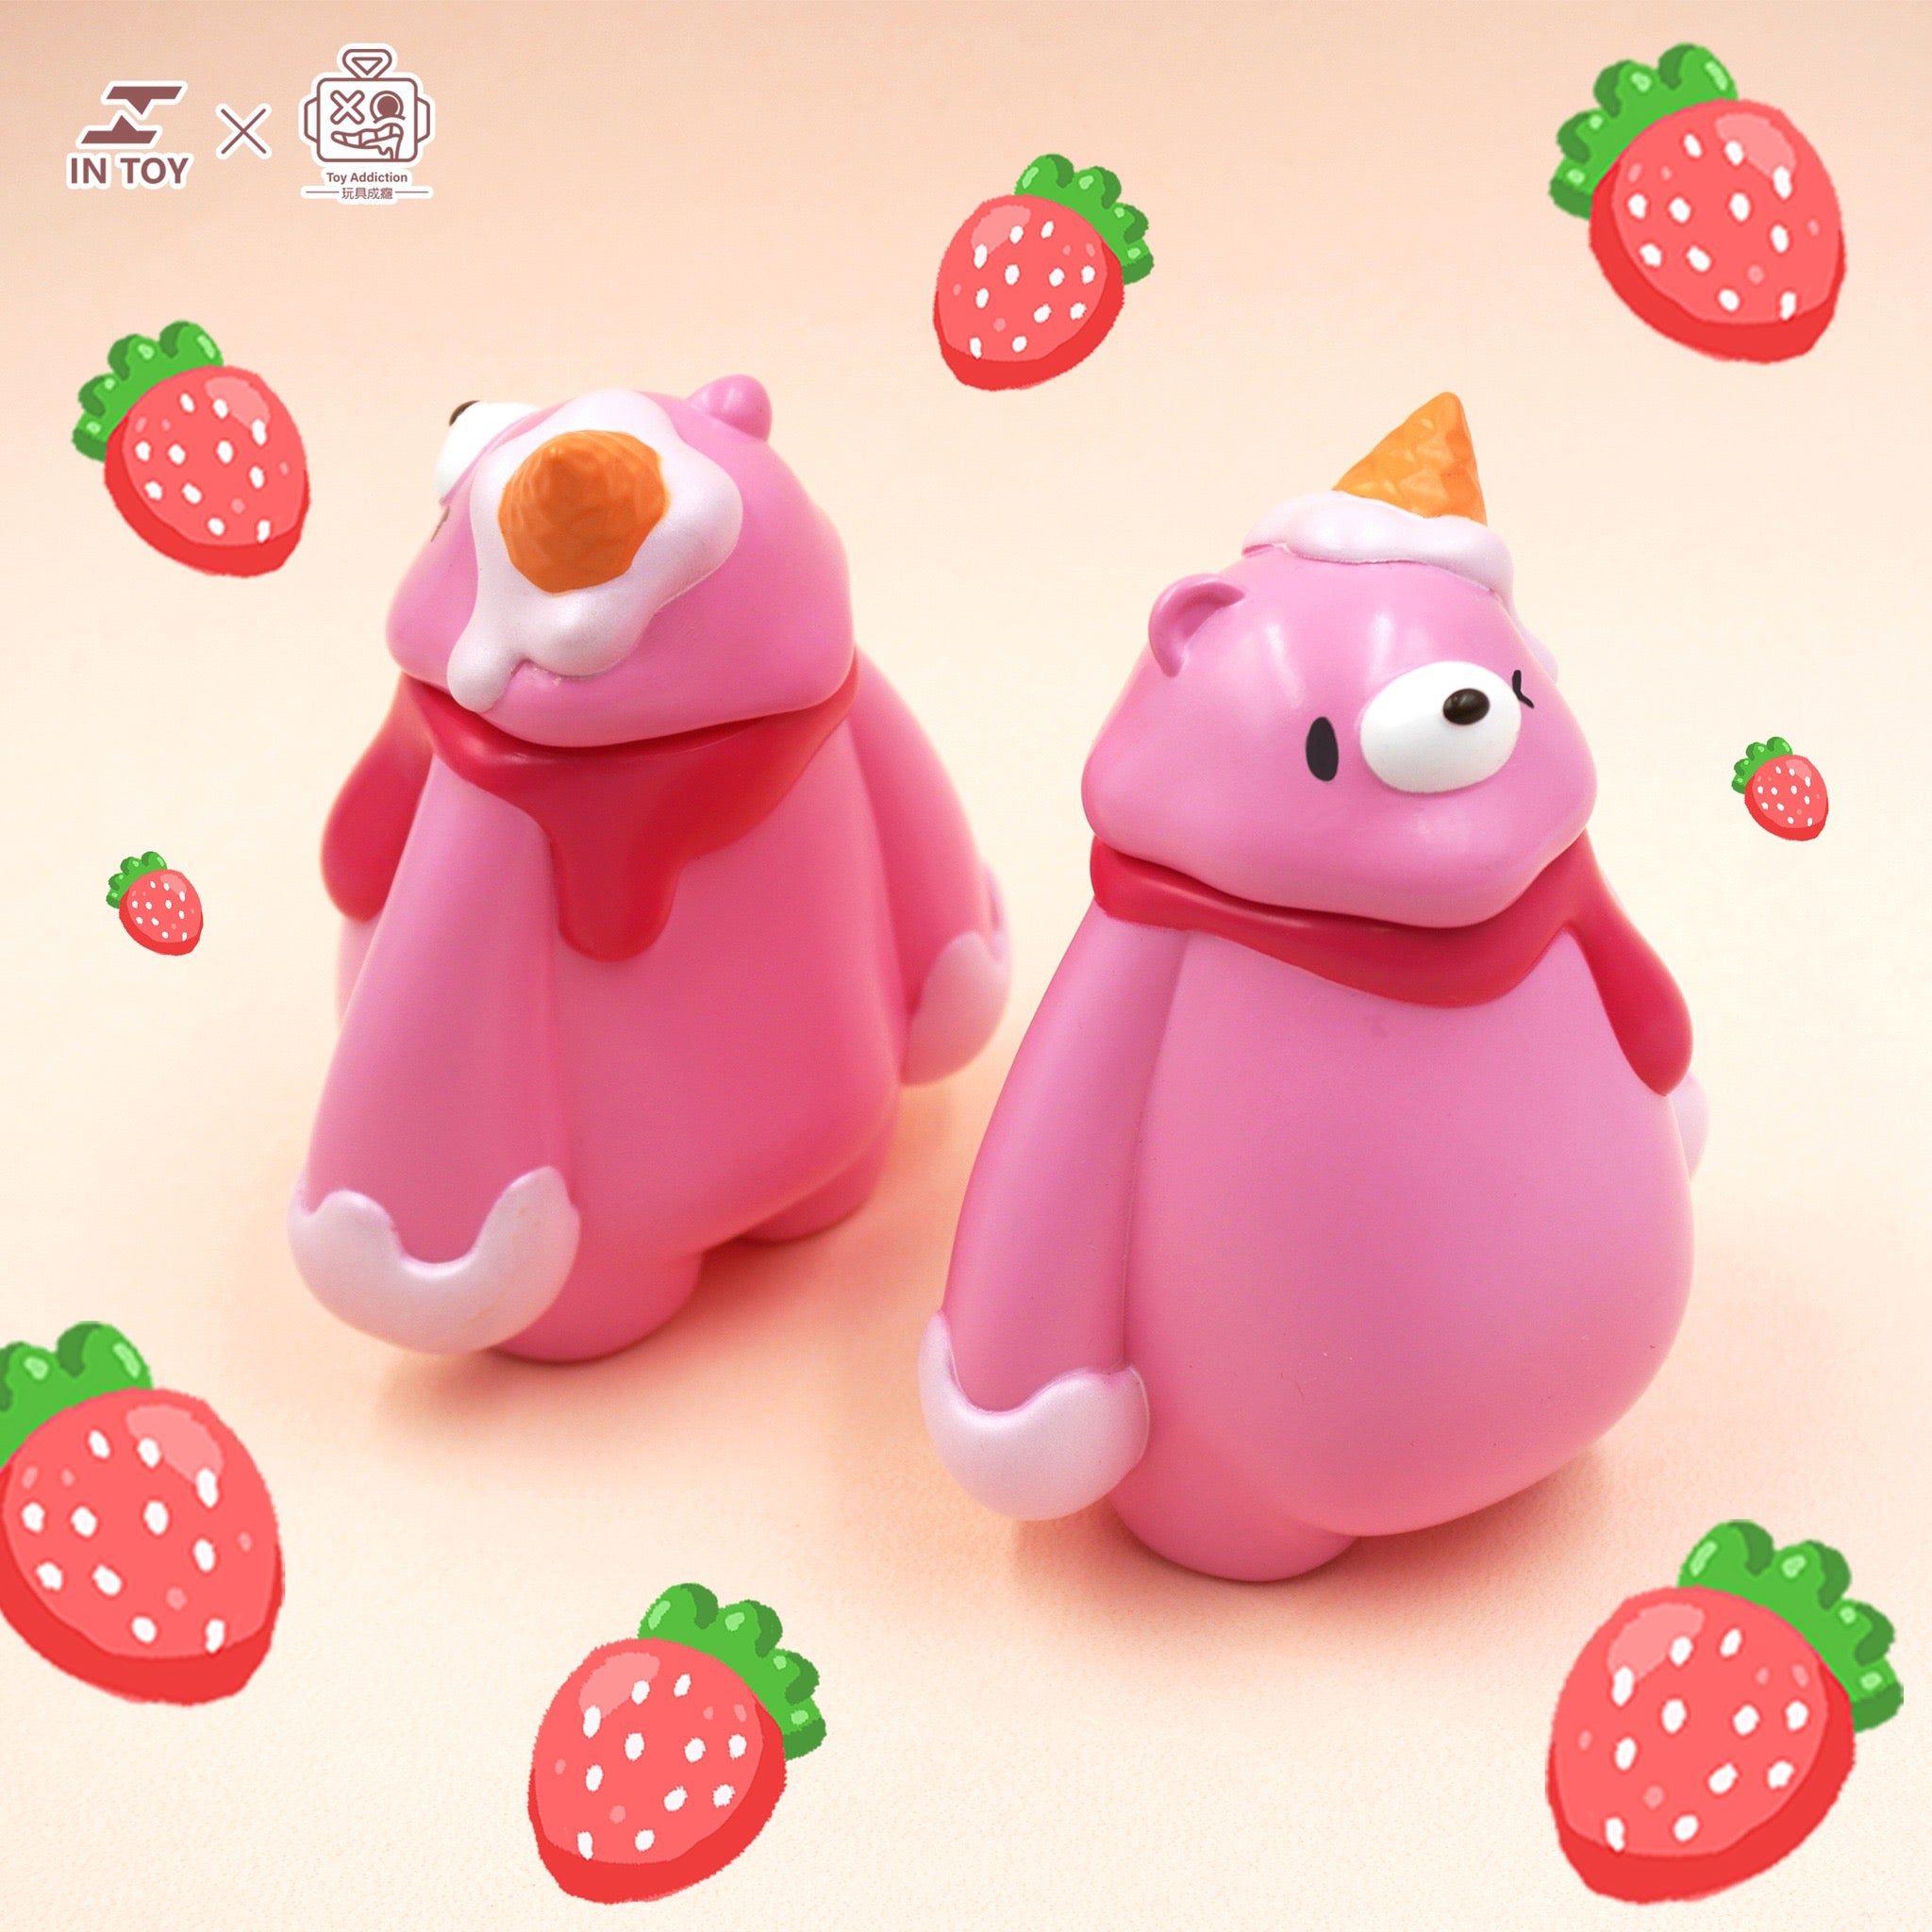 Sherbet Bear - strawberry .VER by Toy Addiction